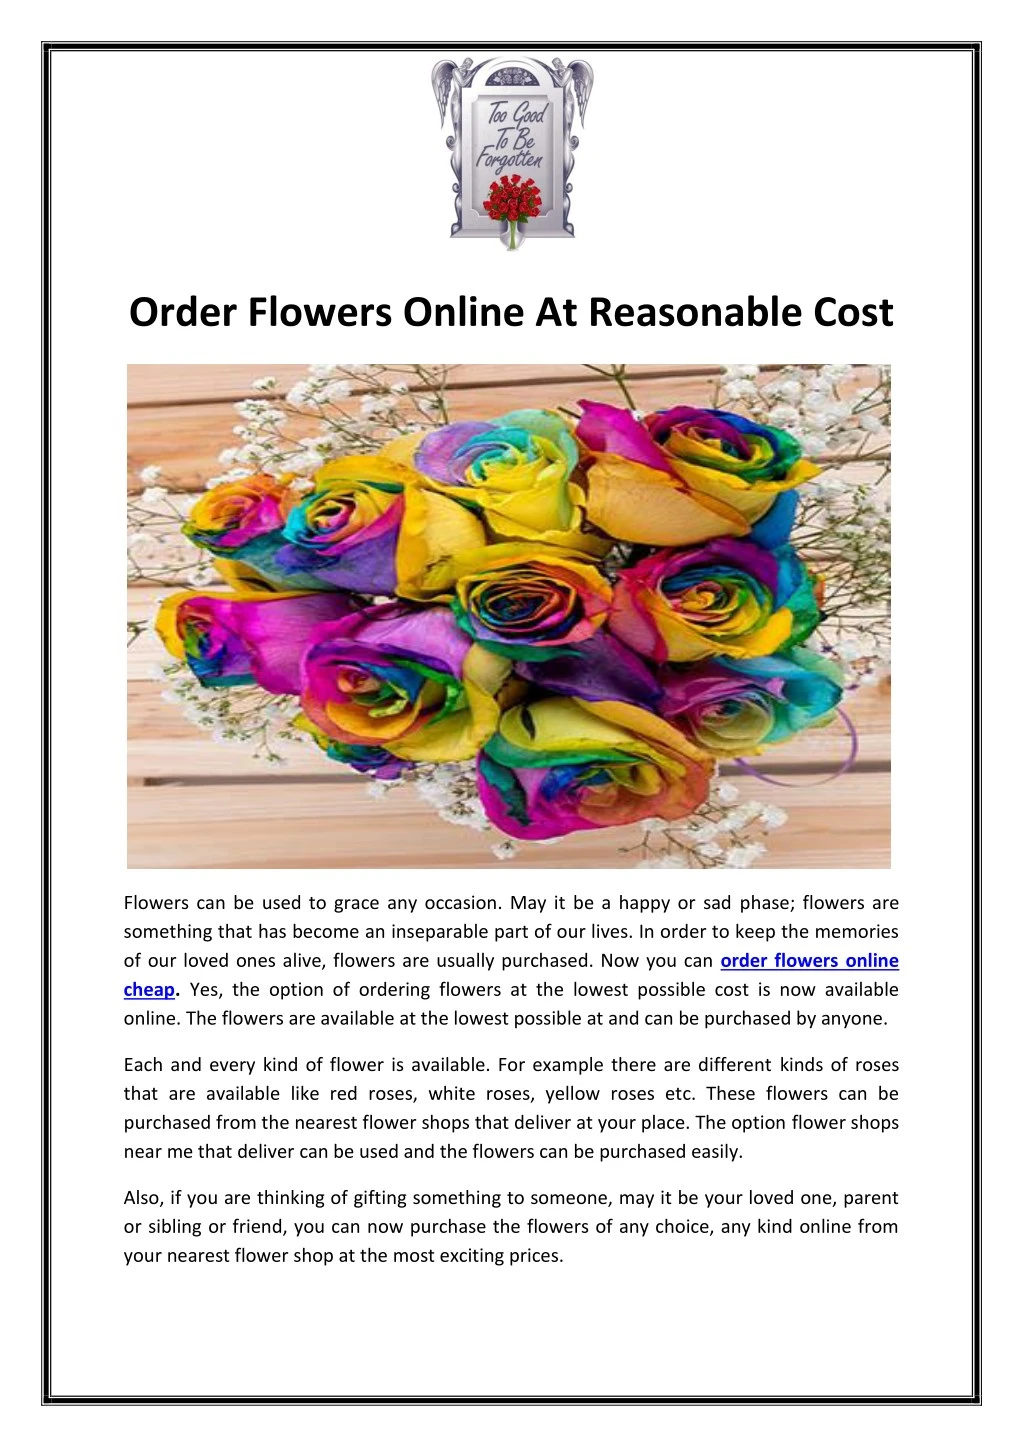 order flowers online at reasonable cost